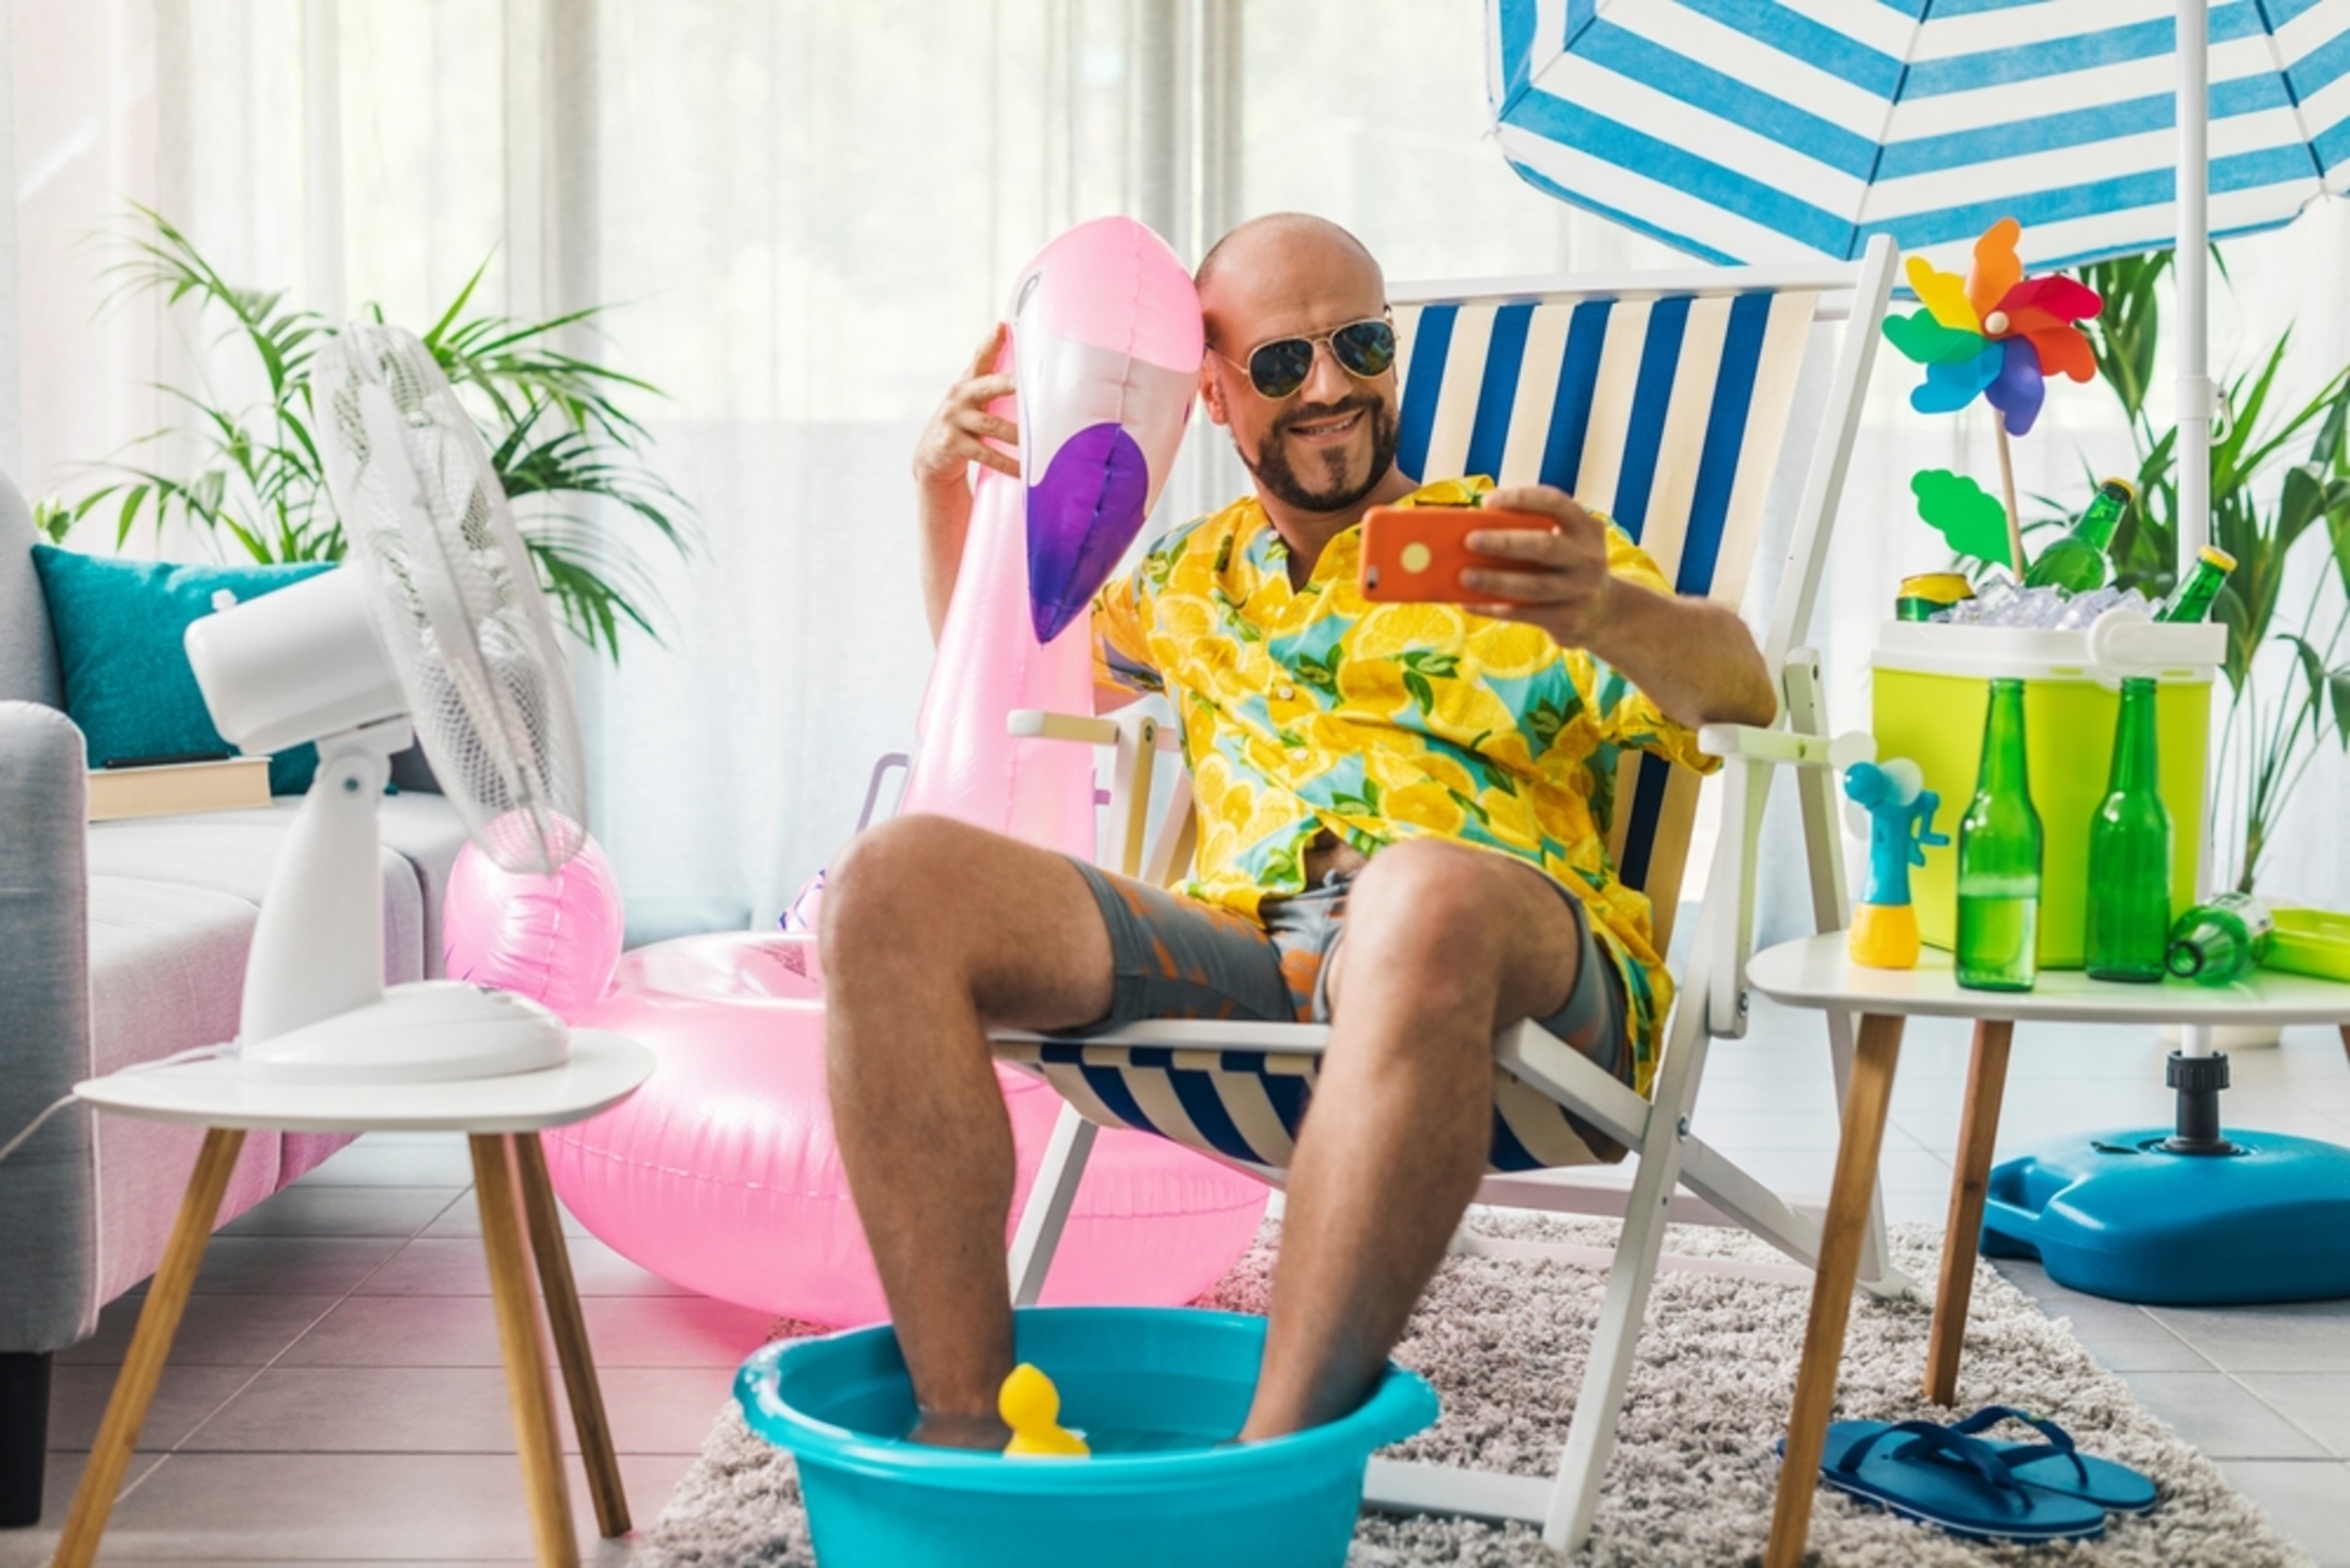 <p>If a vacation isn't in the cards, try a staycation! Make a list of the activities you love to do in your city, plus new things you've never experienced, and spend a day exploring. Or simply stay at home with a few activities, or set up your own pool vacation in the comfort of your living room. </p><p>You may also like: <a href='https://www.yardbarker.com/lifestyle/articles/protein_packed_foods_that_will_help_fuel_your_muscles_120823/s1__34248305'>Protein-packed foods that will help fuel your muscles</a></p>